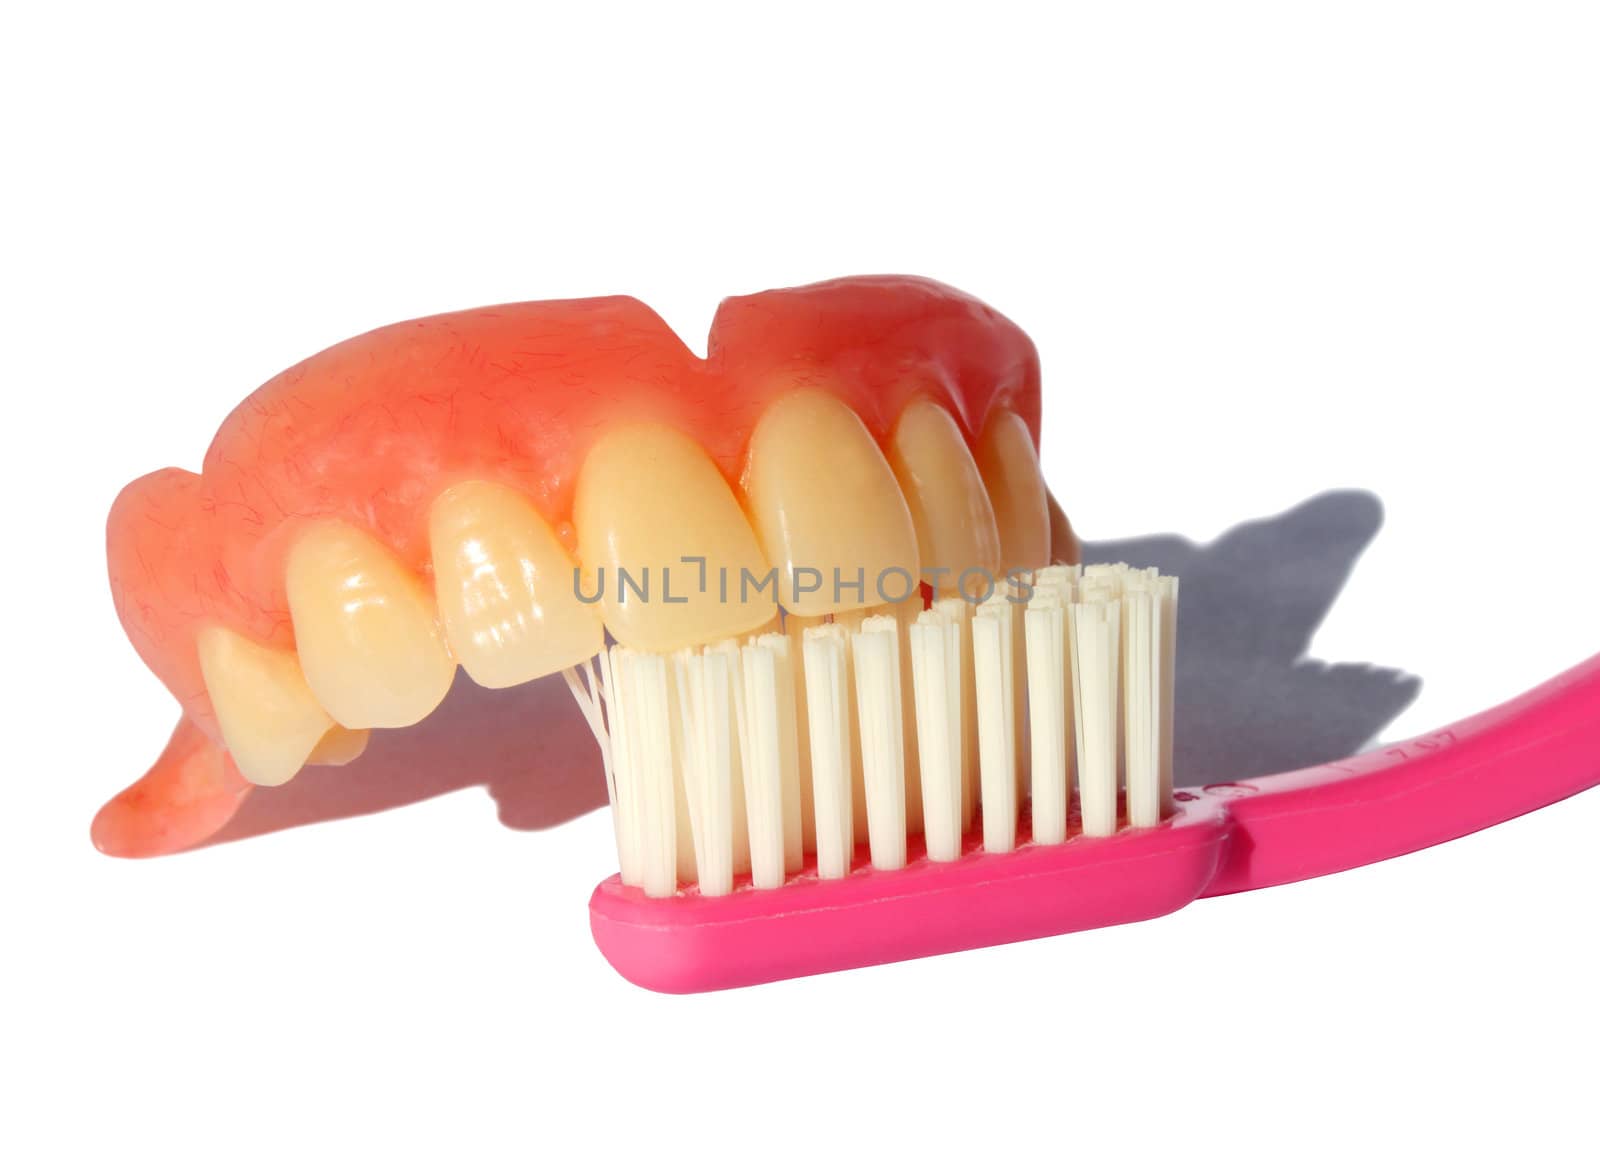 A complete upper false teeth top on a pink toothbrush.